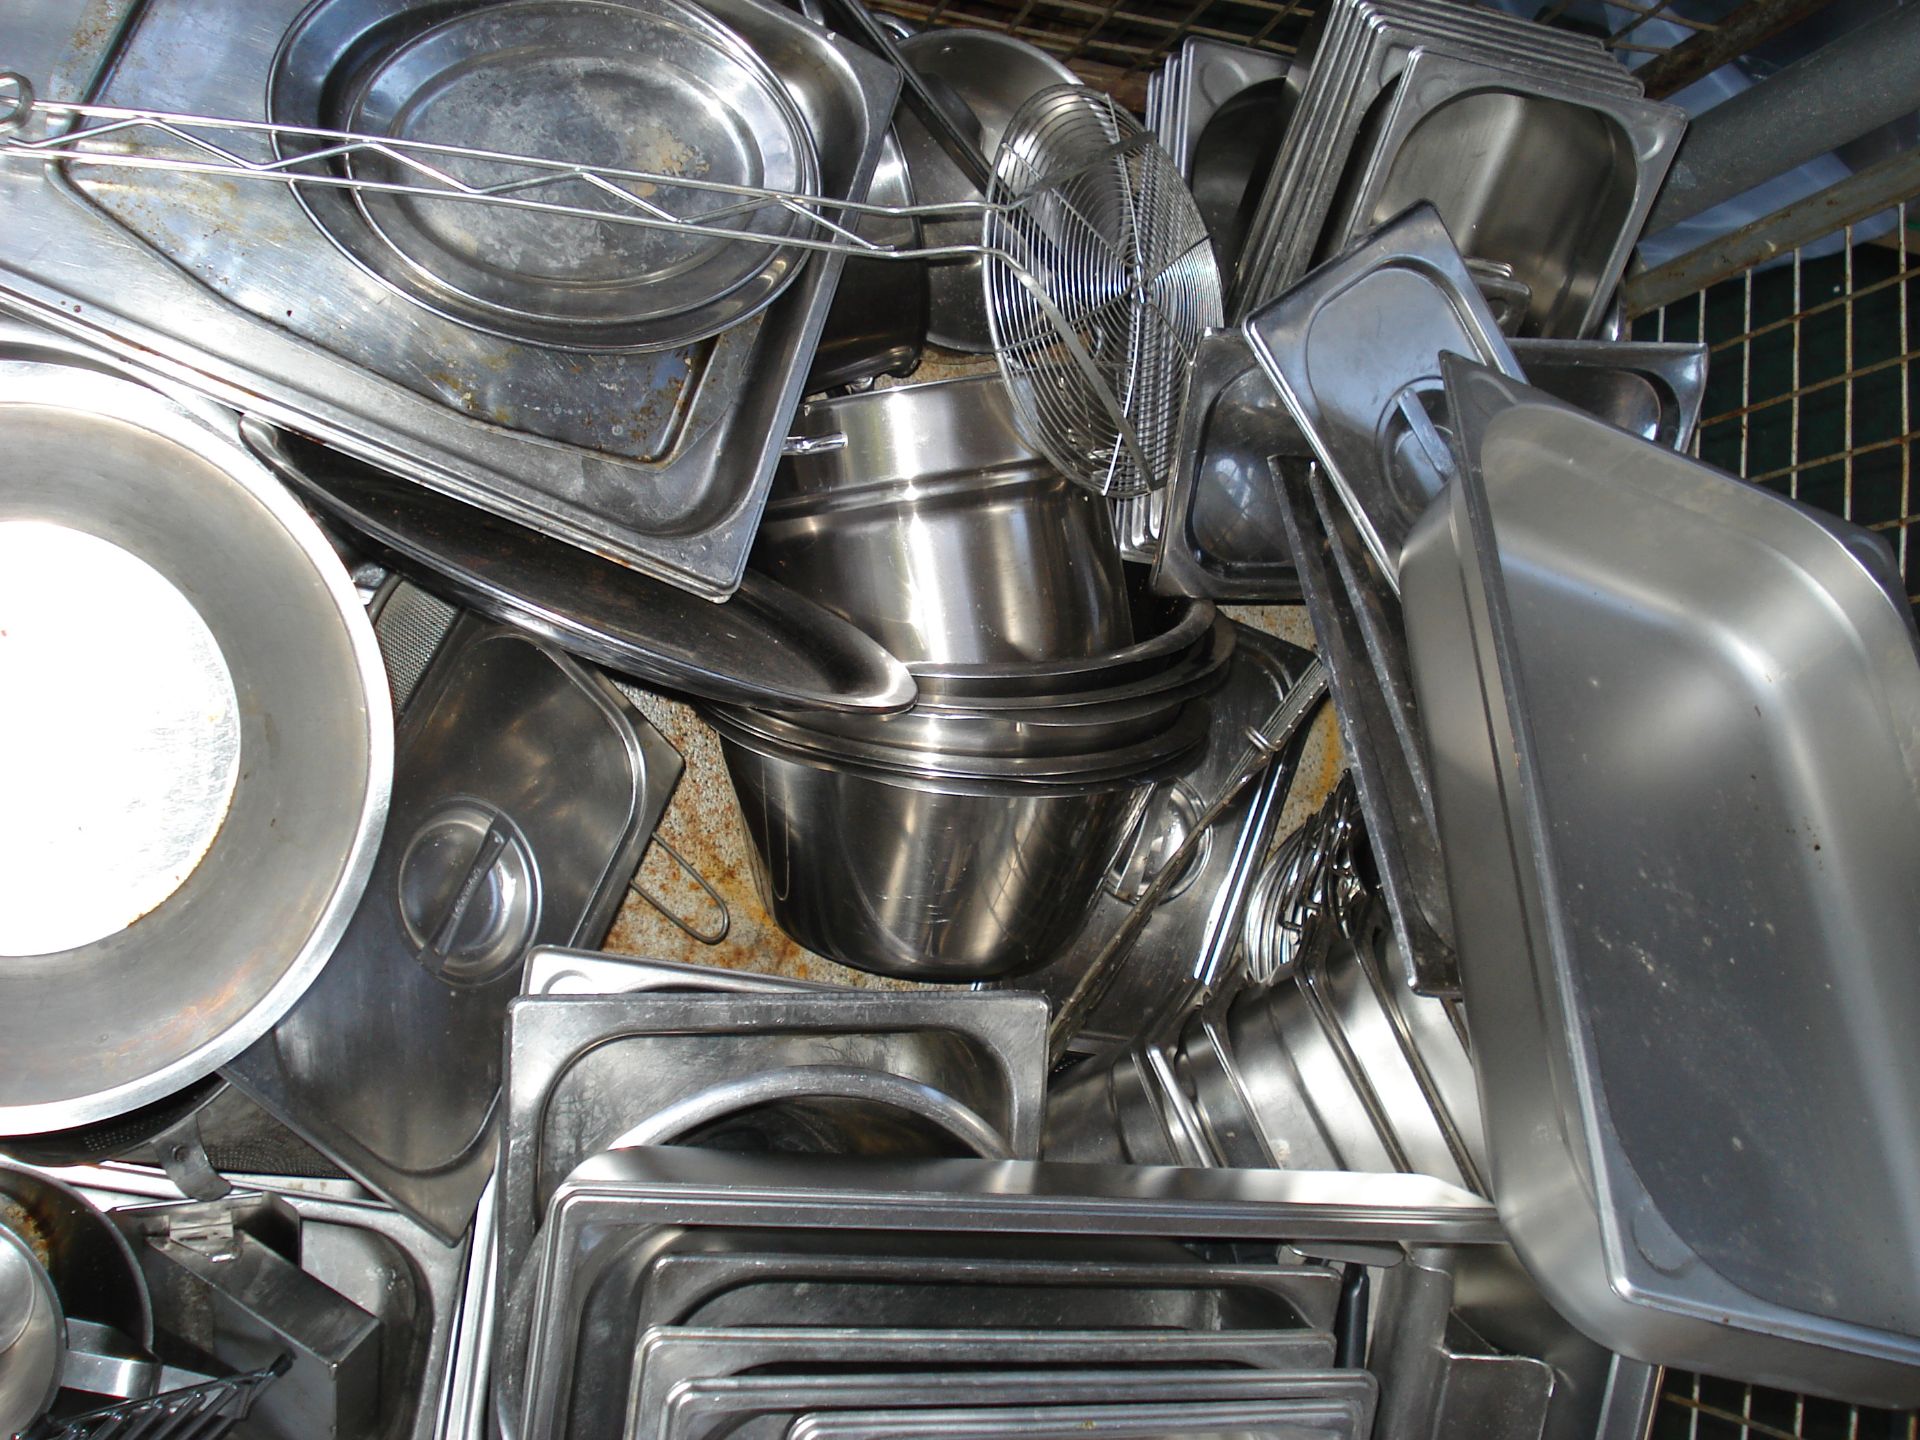 MIXED COMMERCIAL GRADE COOKING TRAYS/SAUCEPANS AND BAIN MARIE POTS - MIXED CONDITION - STORAGE MEDIA - Image 2 of 2